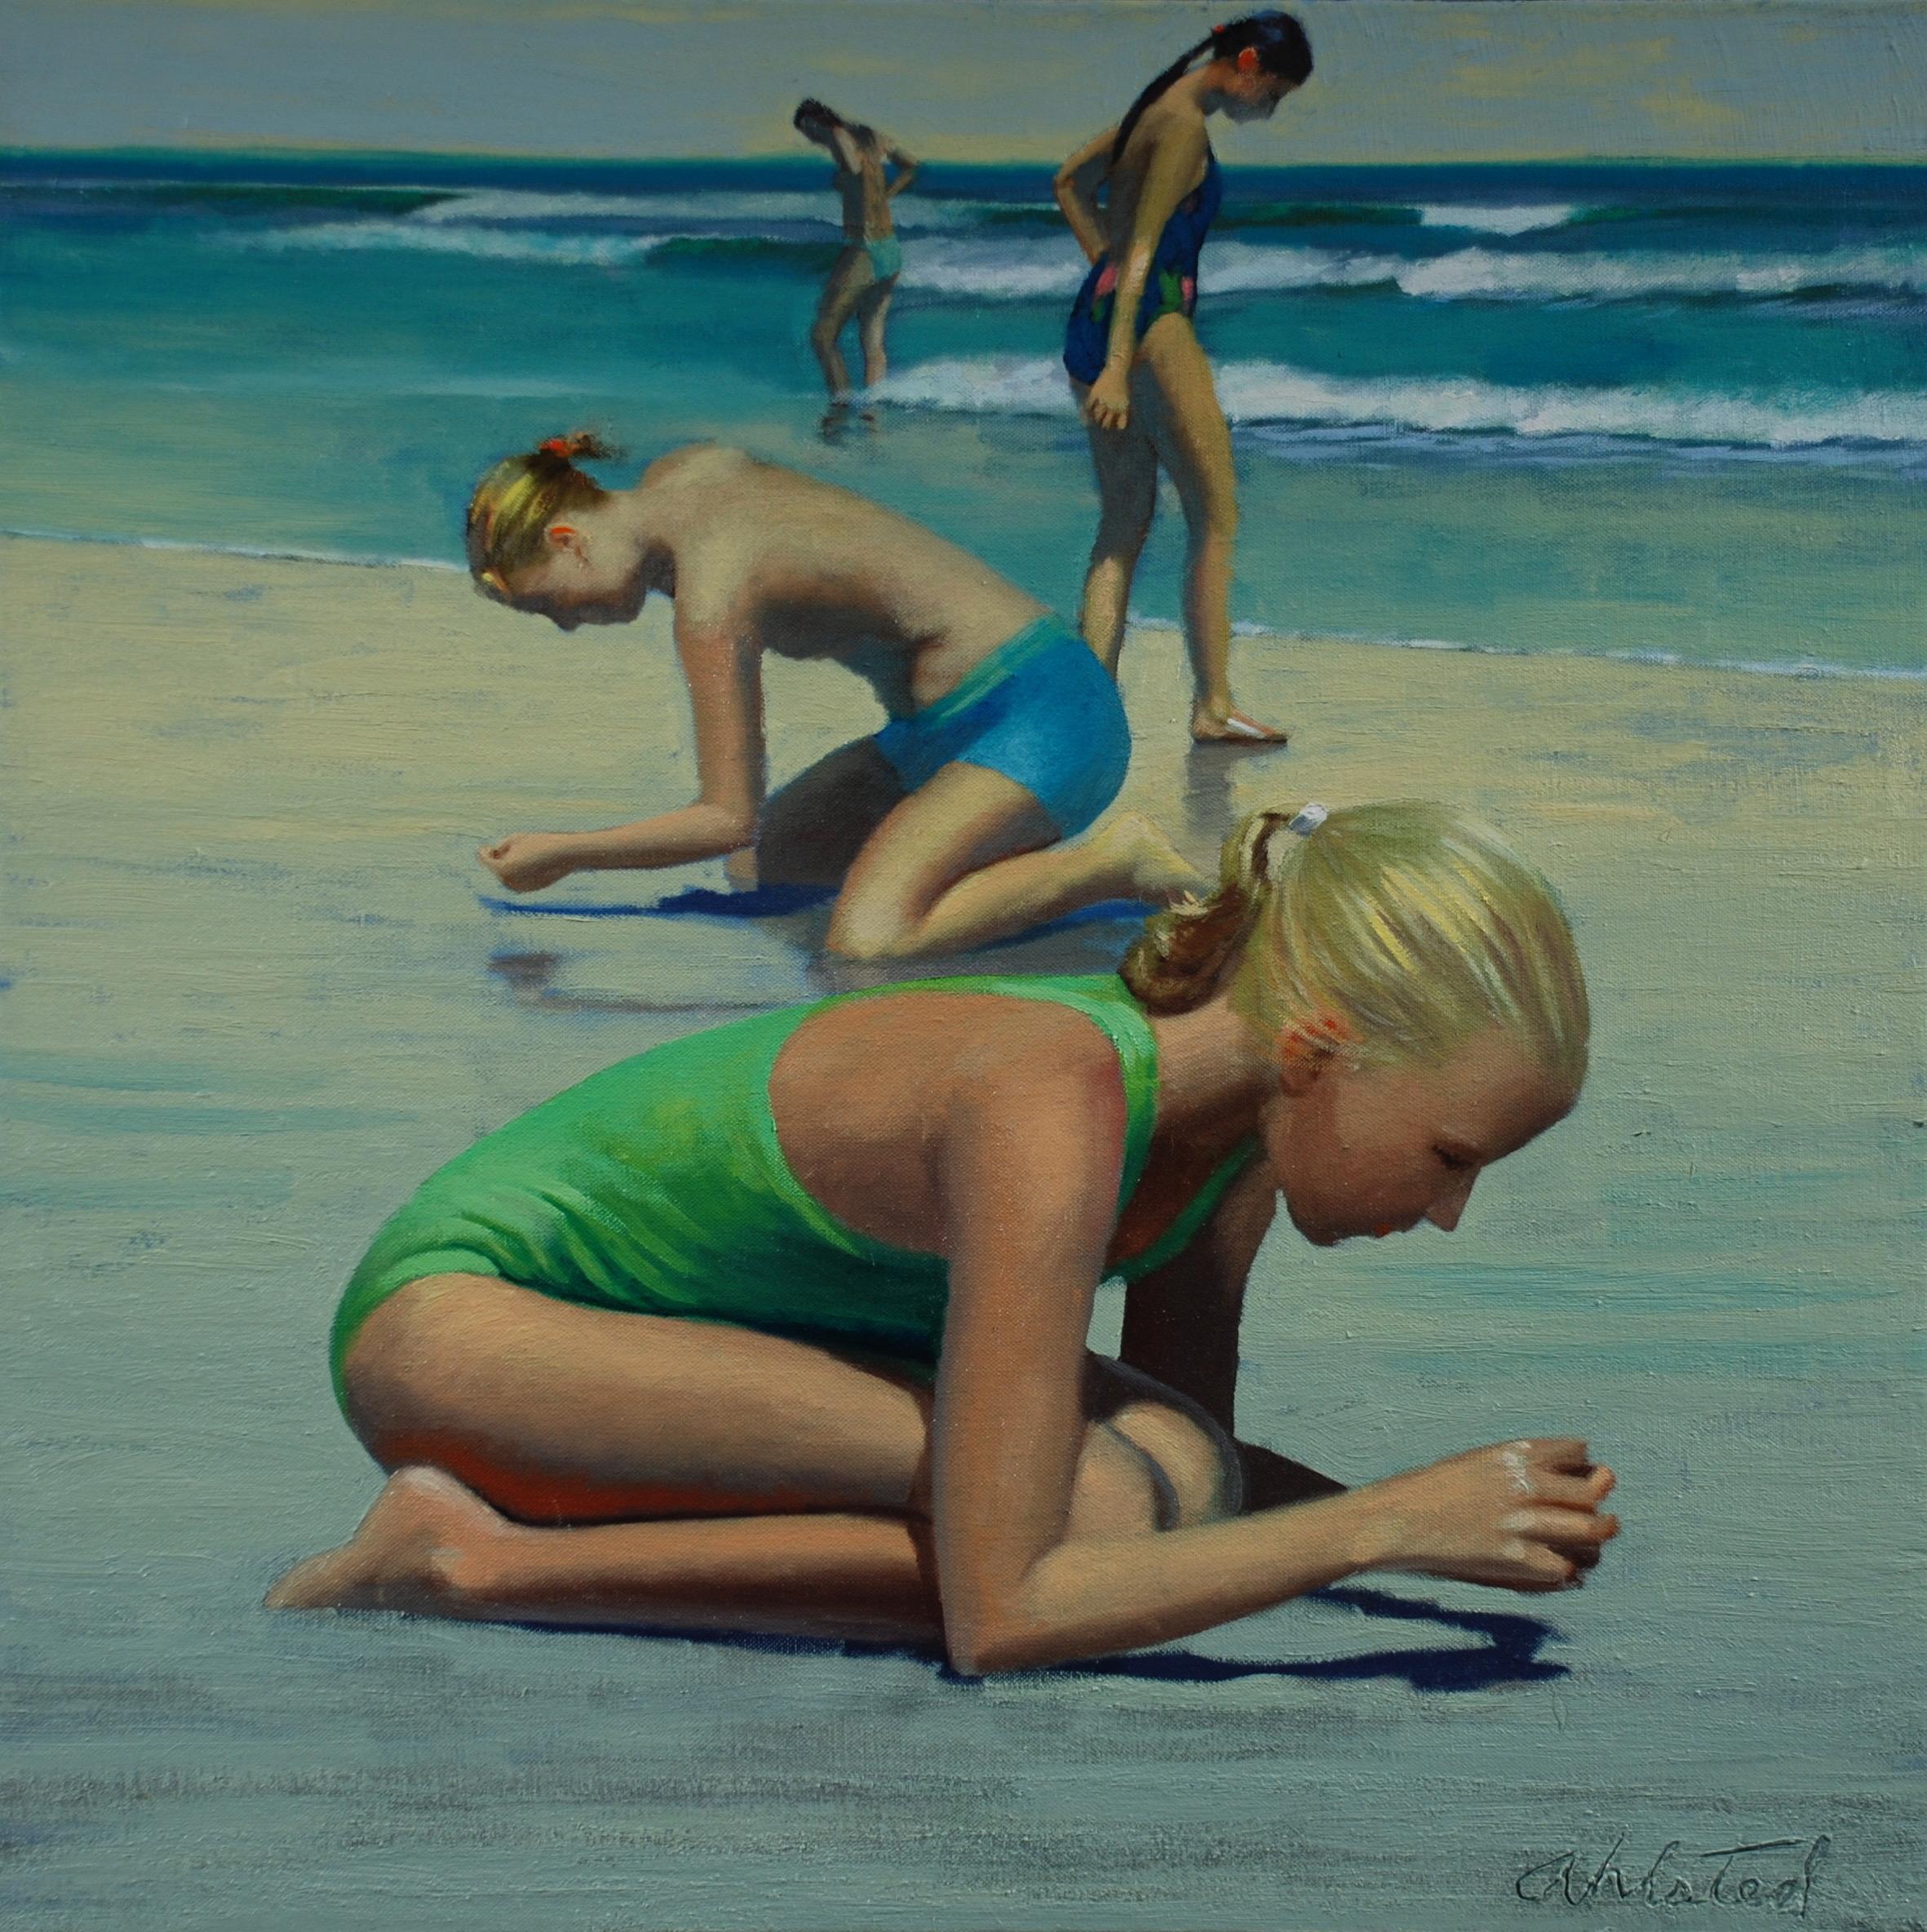 David Ahlsted
“ When the Tide is Low “
Oil on Canvas
 24 x 24”
Retail $ 2,400.00.

David Ahlsted is an American artist known for his paintings of the Jersey Shore, industrial landscapes, and large scale still-life works. His work is described as